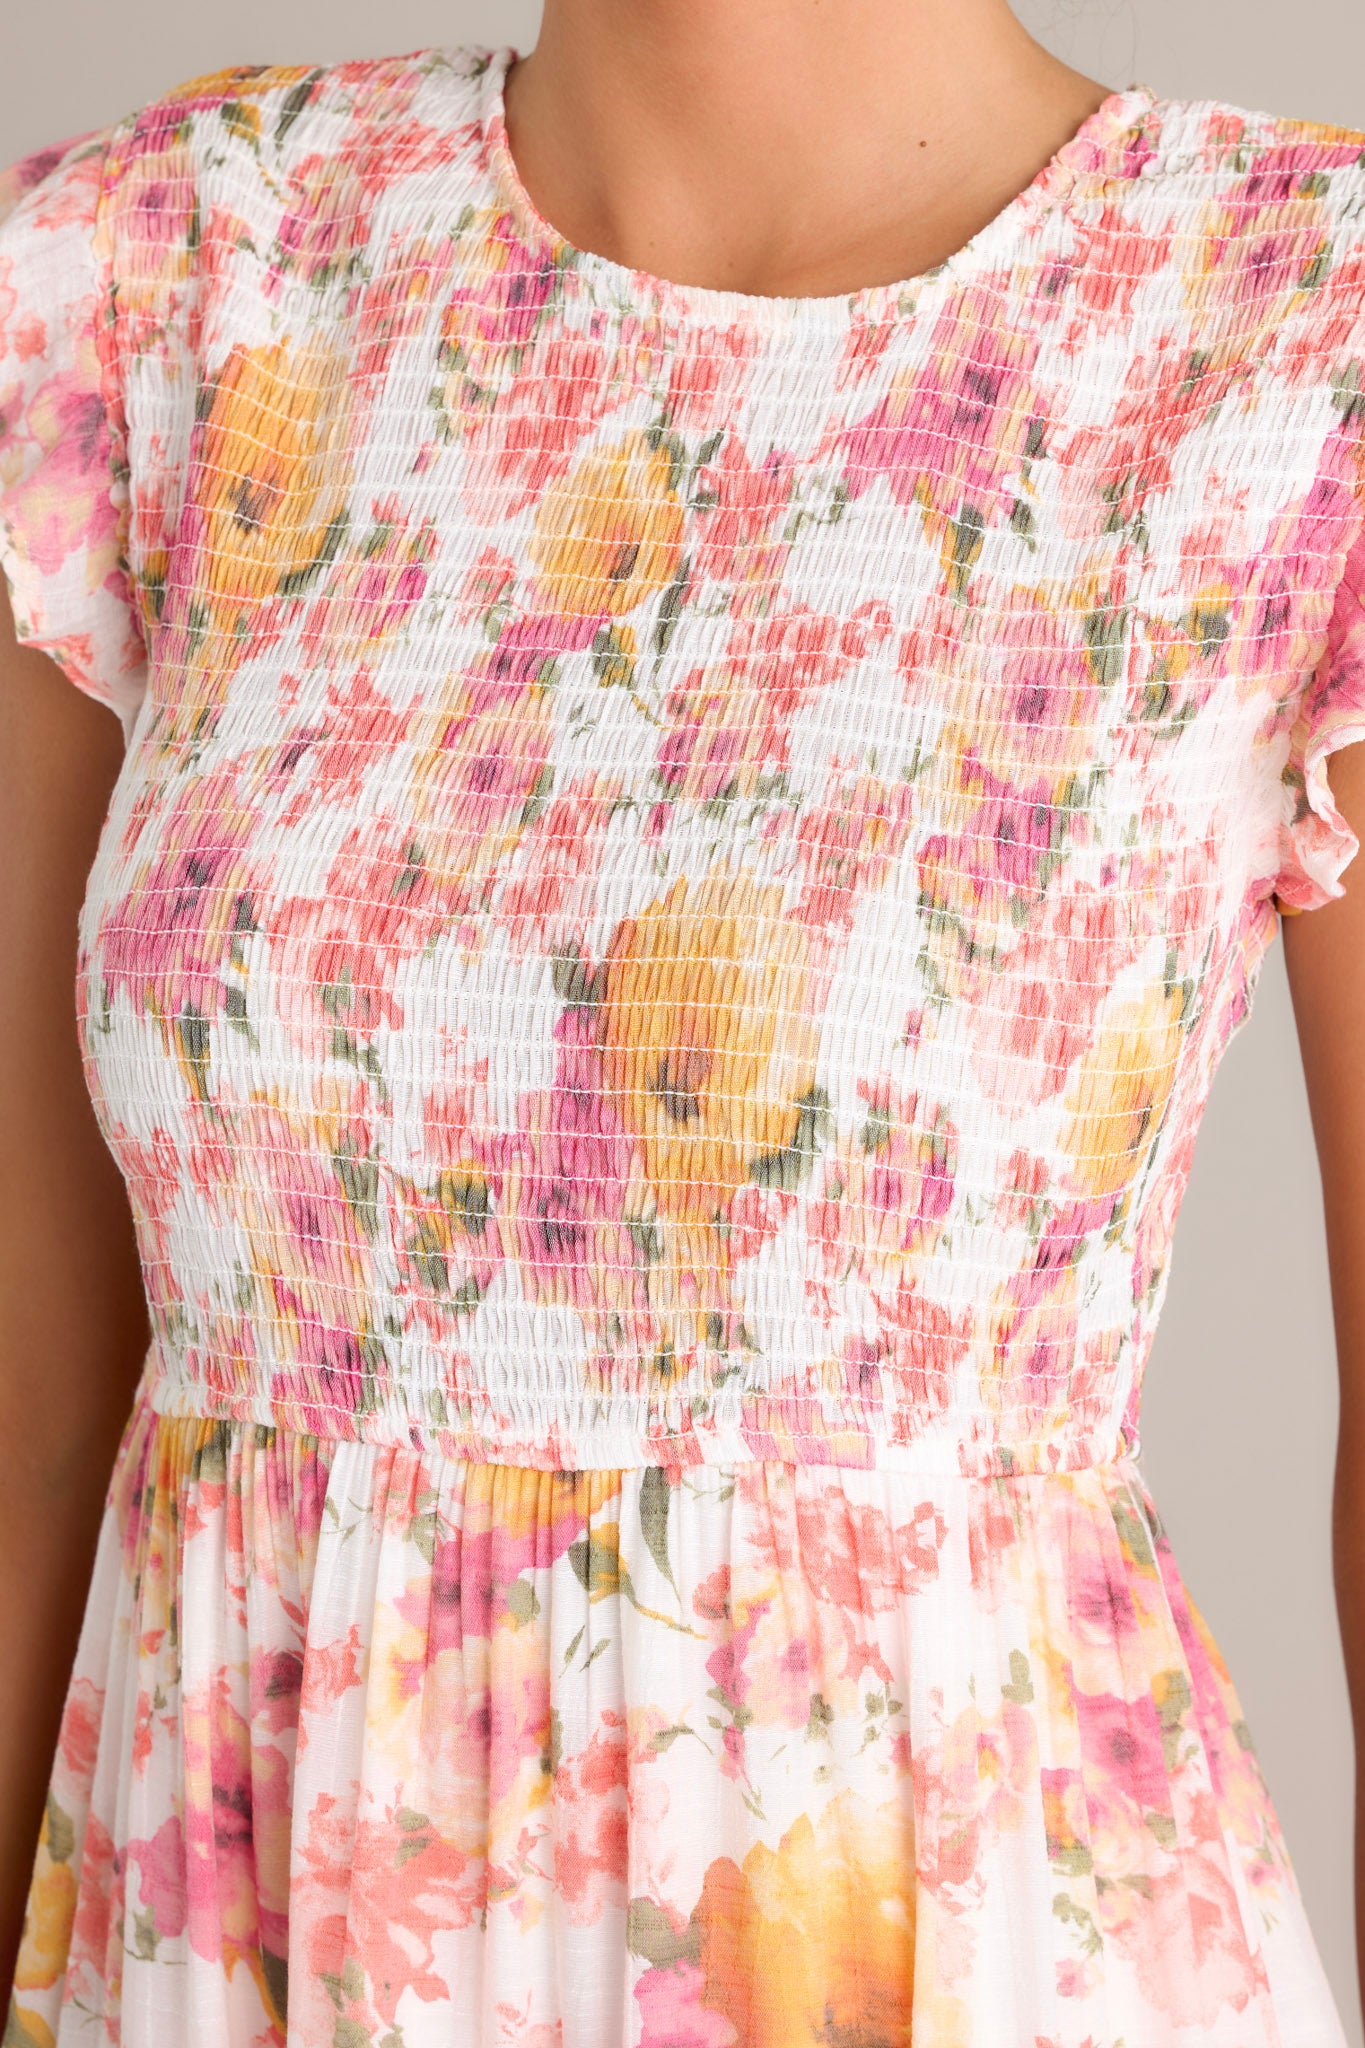 Fabric detail of this pink floral midi dress, highlighting the colorful floral pattern and smocked texture.